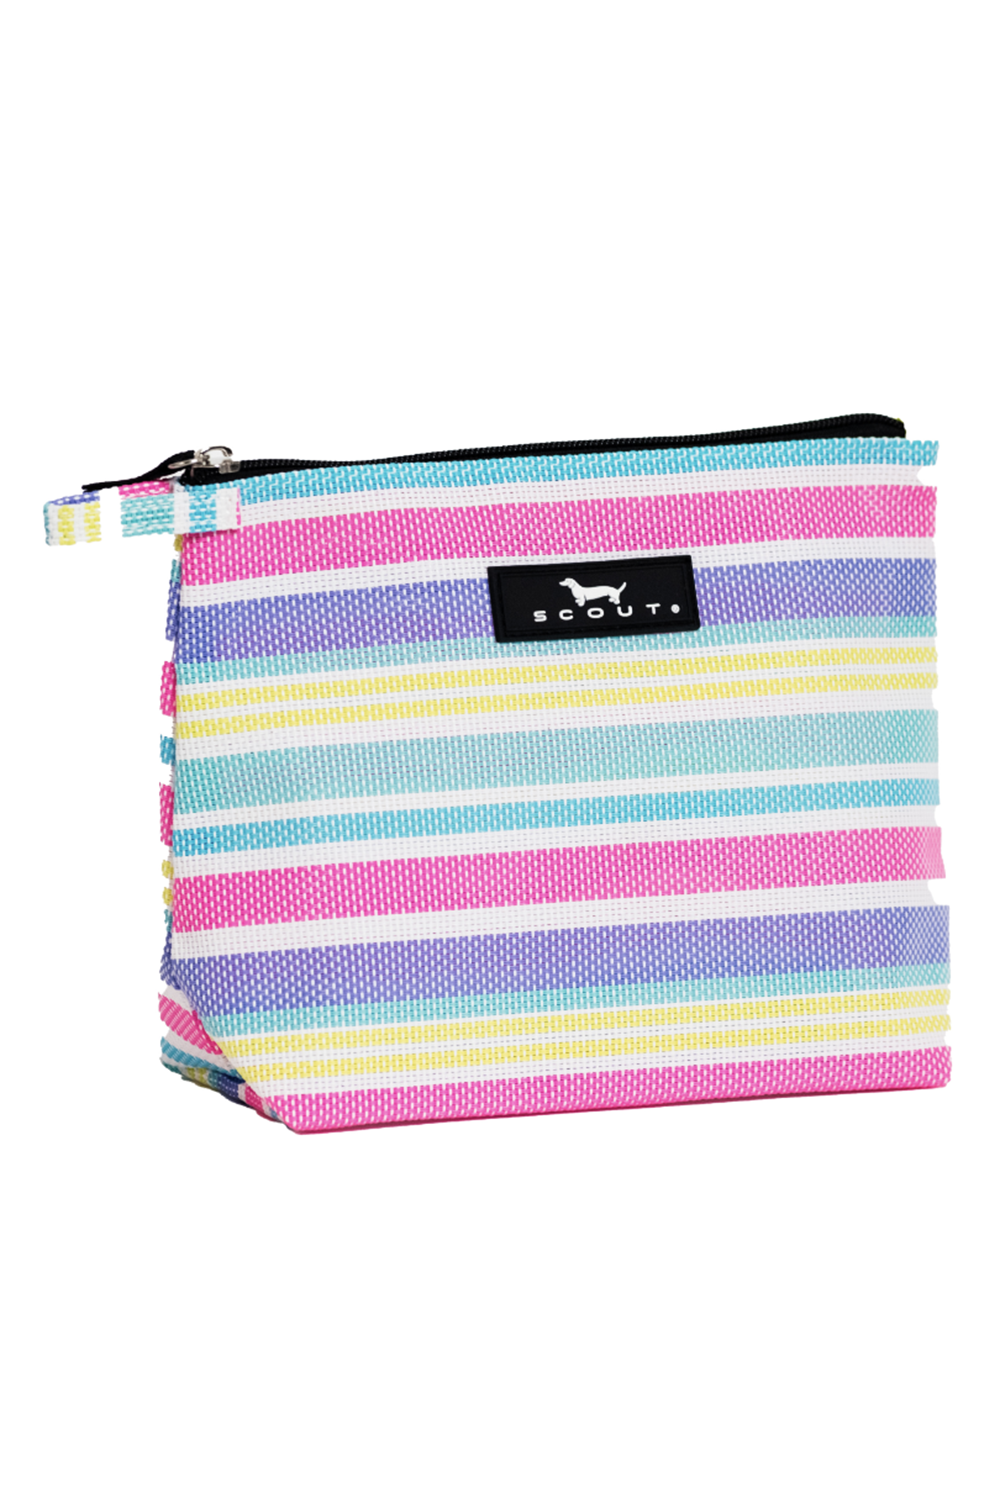 Go Getter Cosmetic Bag - "Freshly Squeezed" SUM24